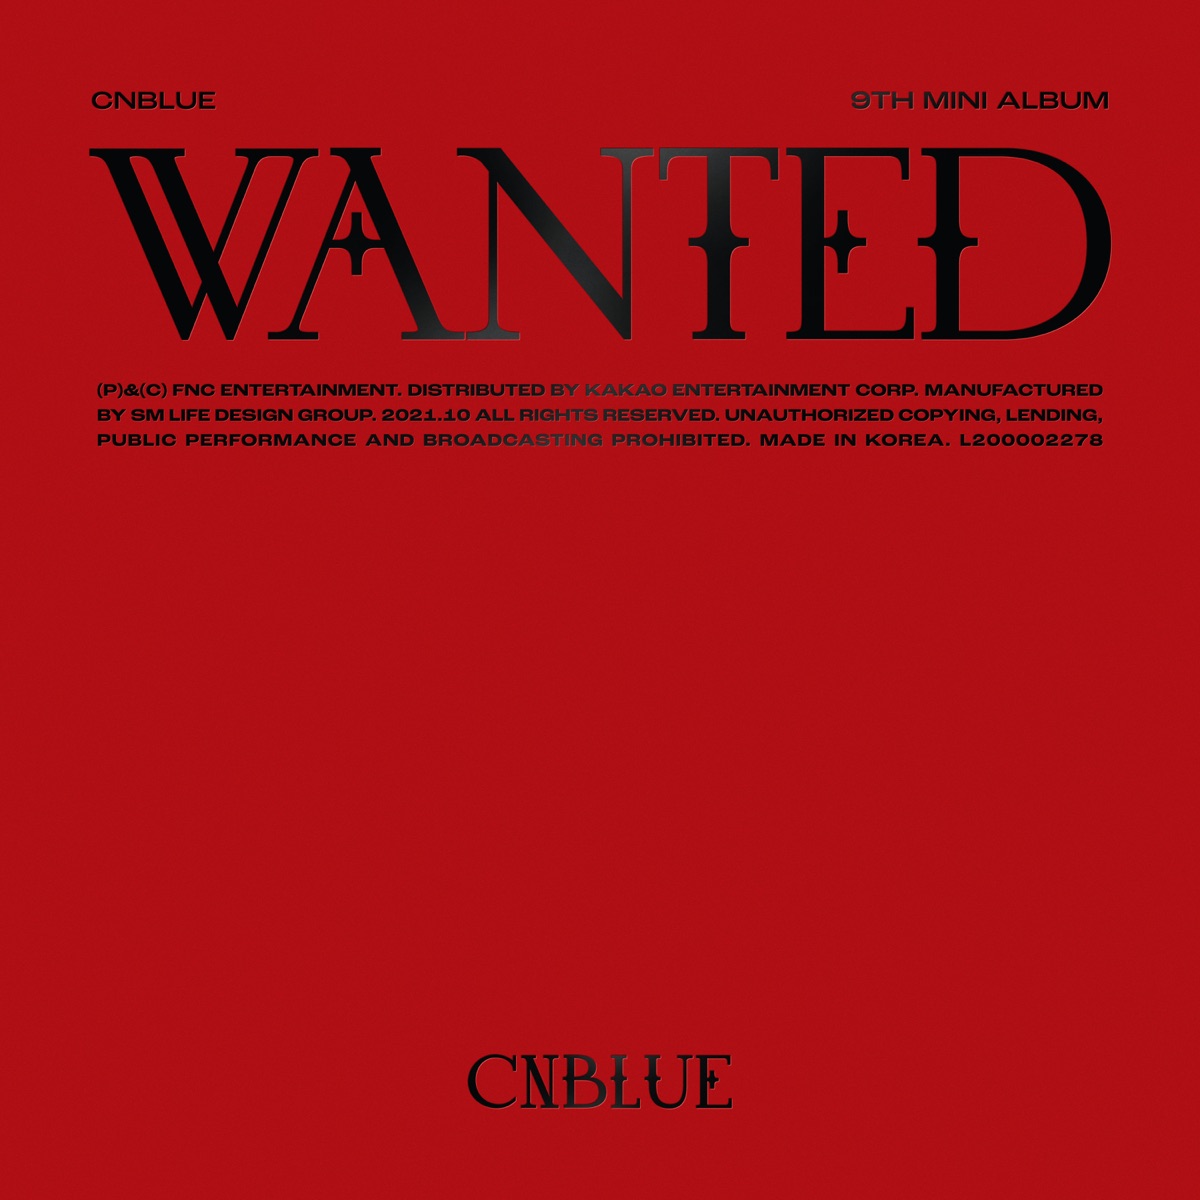 Cover for『CNBLUE - Time Capsule』from the release『WANTED』